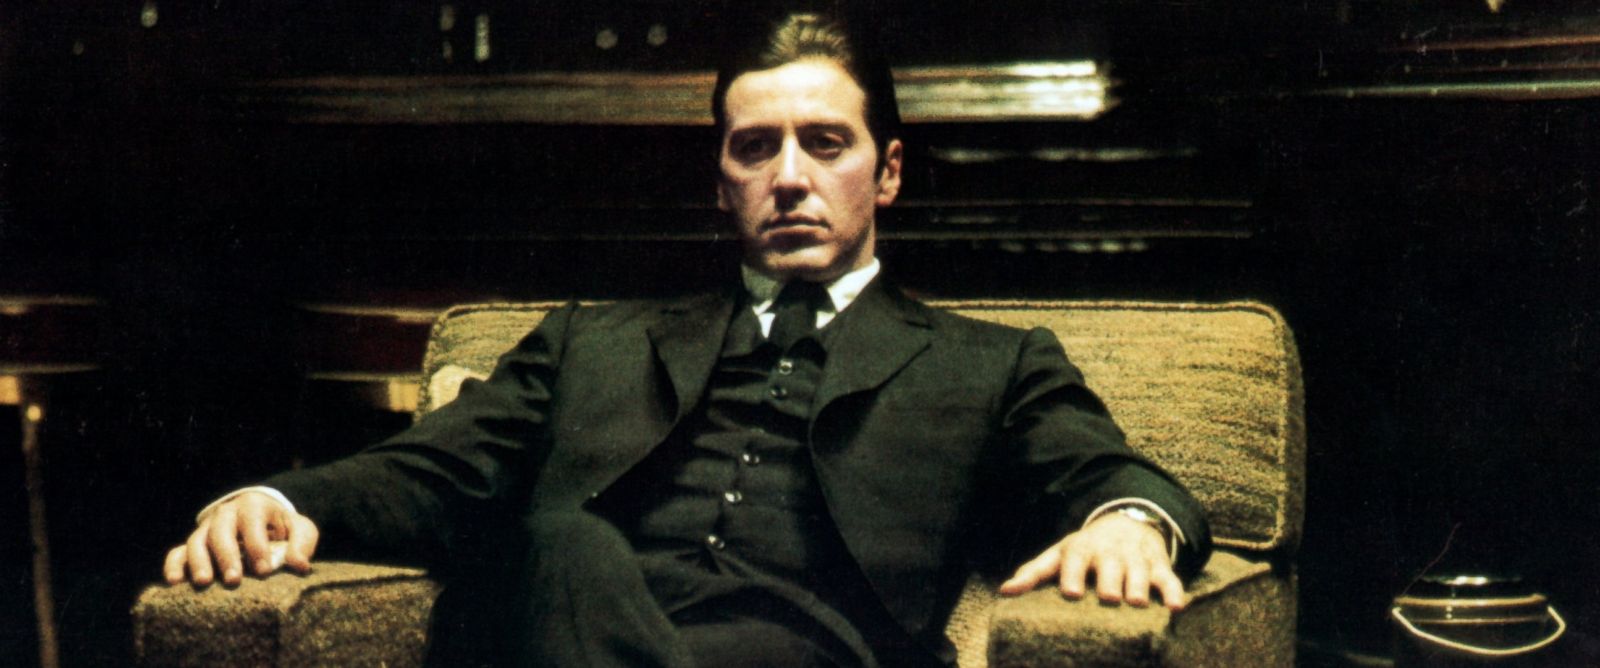 The Godfather: Part II #12